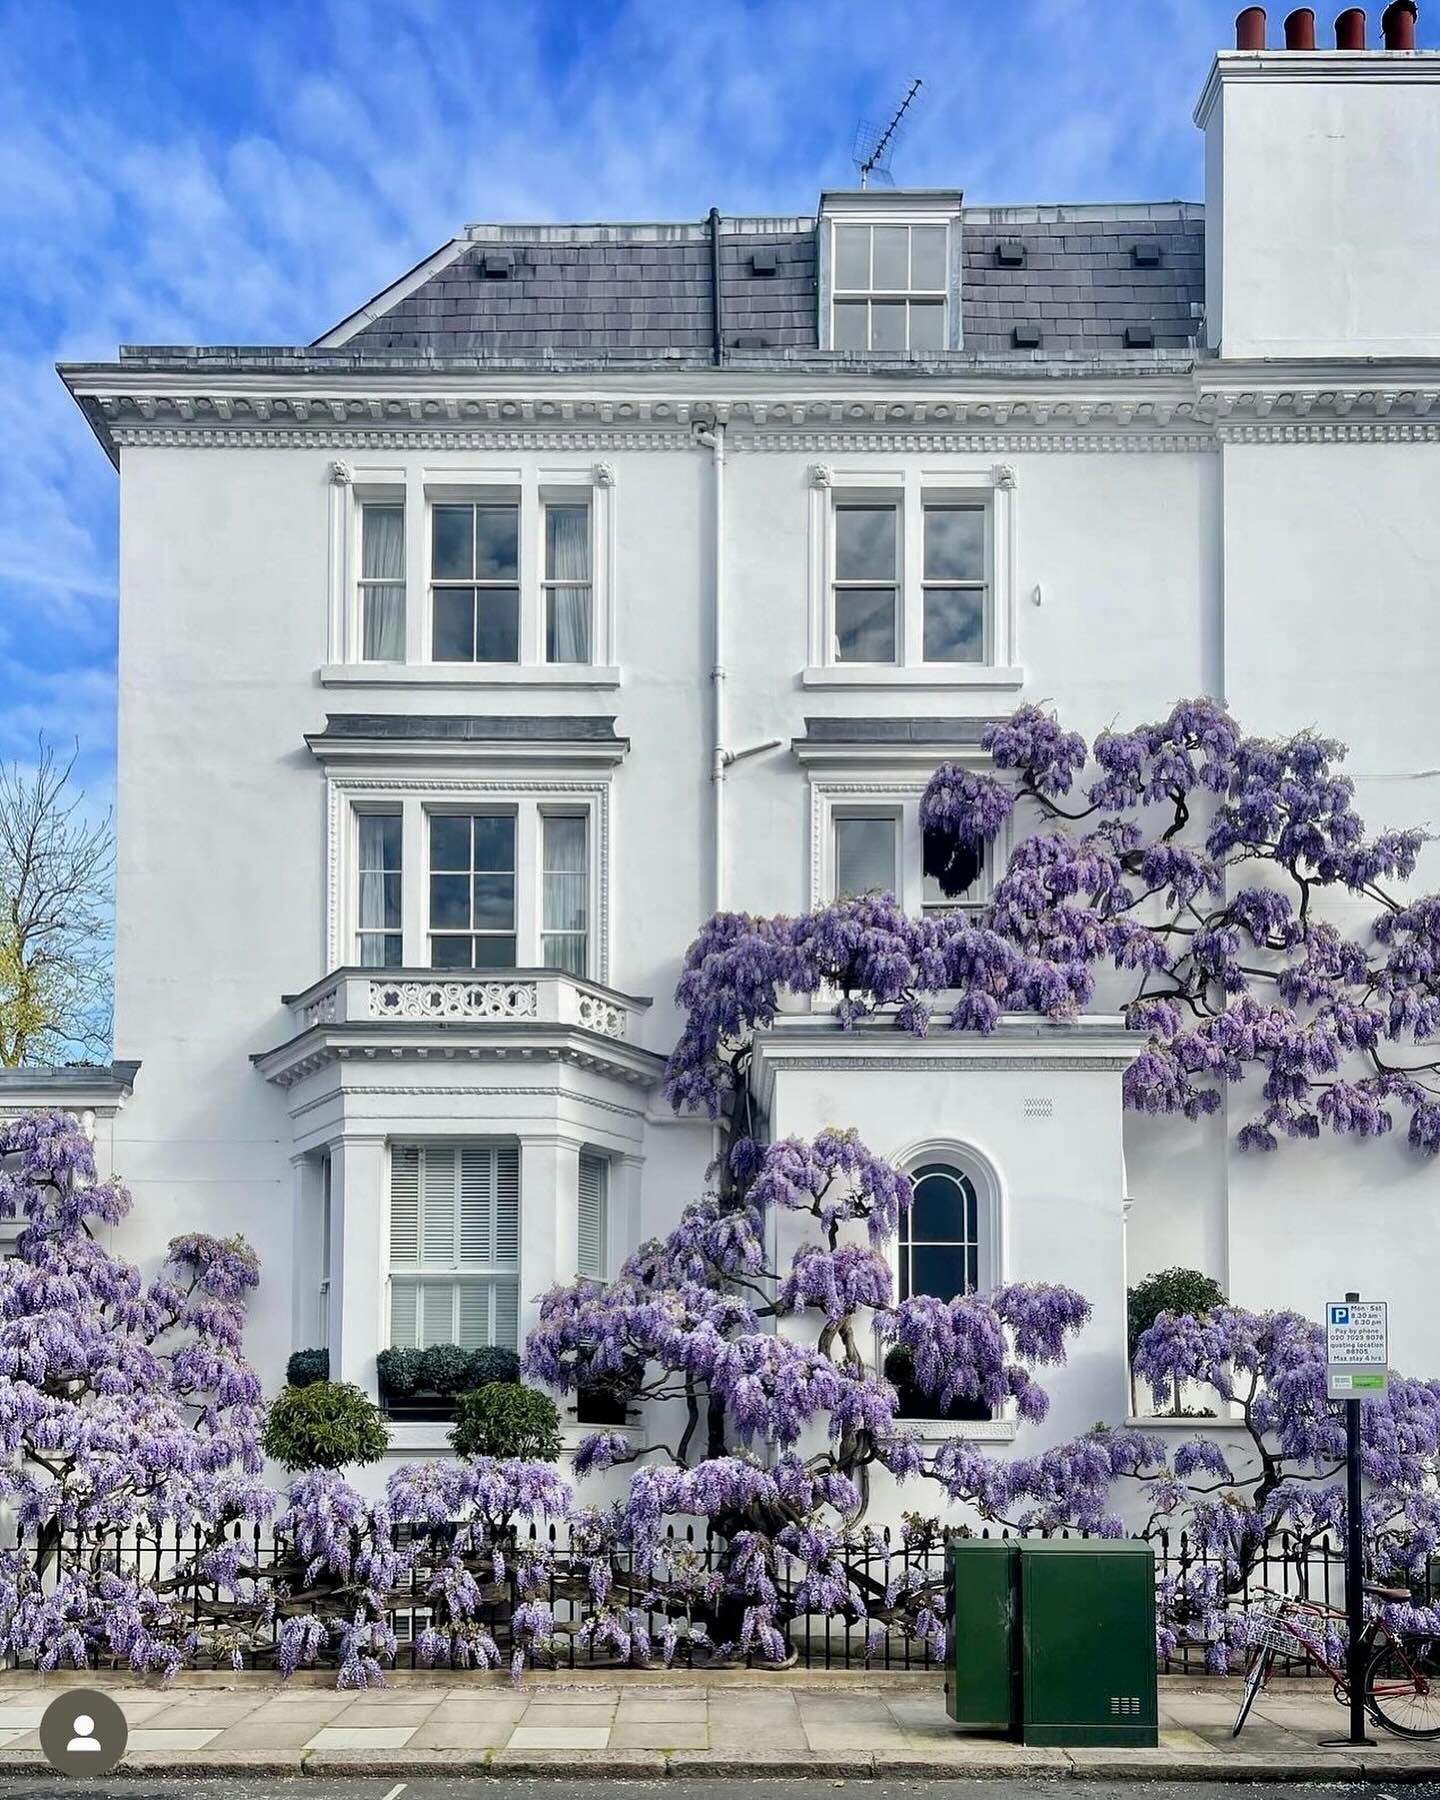 Guess what time of year it is again in London? Only the most beautiful. 🌸

#abroadinlondon #wisteria #wisteriahysteria #londonhouses #london #prettycitylondon #prettylondon #spring #londonspring #getoutside #flowerstagram #londonlife #southkensingto